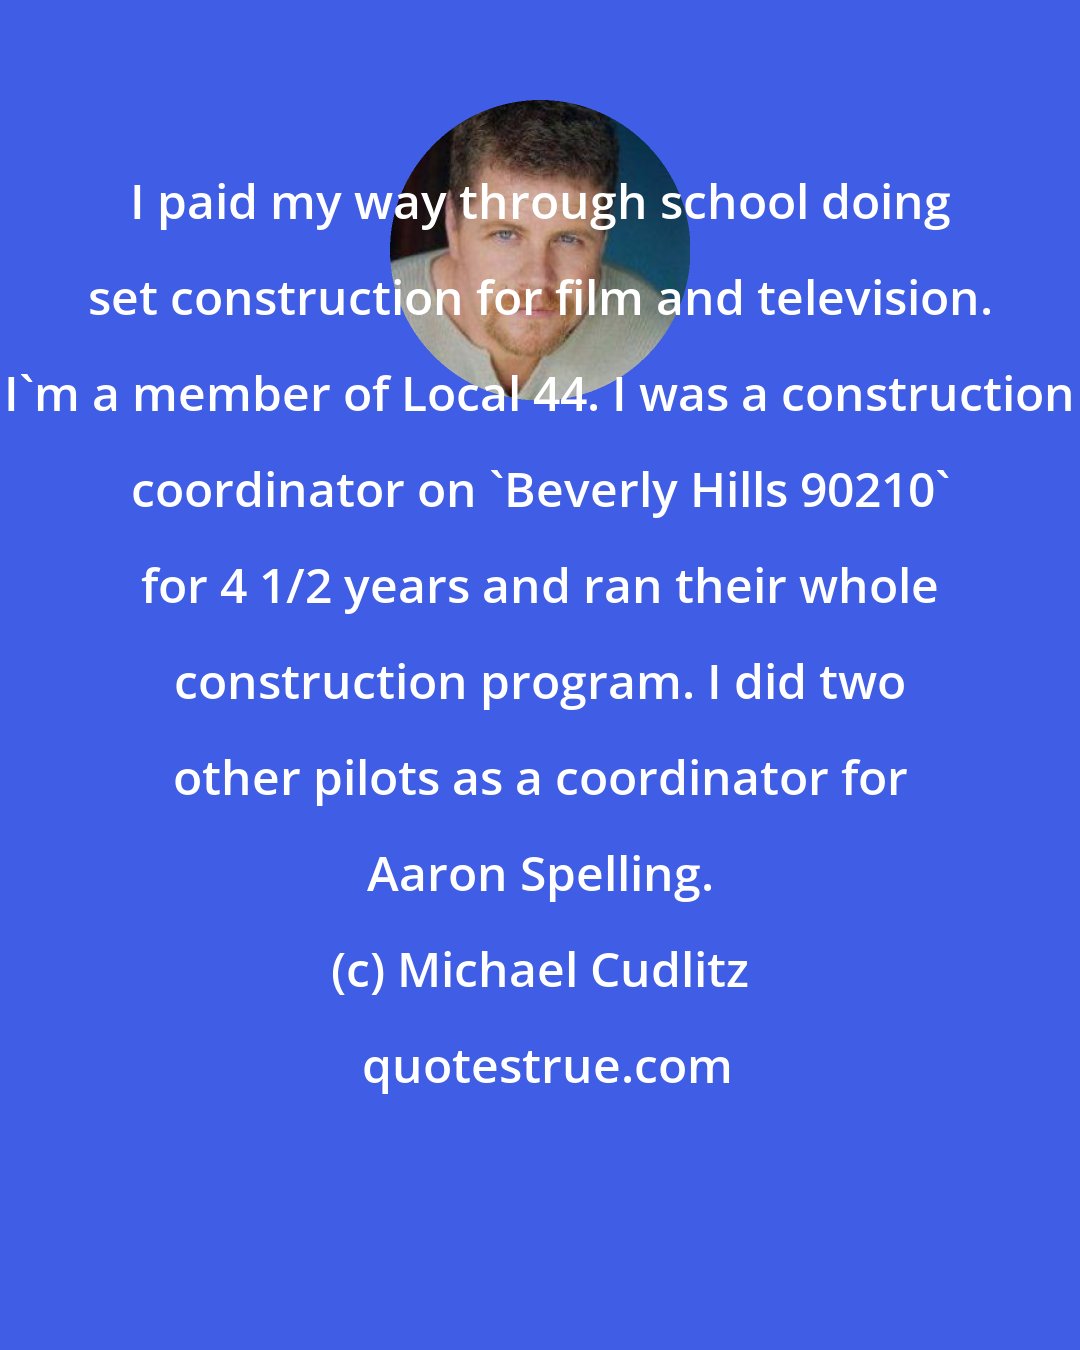 Michael Cudlitz: I paid my way through school doing set construction for film and television. I'm a member of Local 44. I was a construction coordinator on 'Beverly Hills 90210' for 4 1/2 years and ran their whole construction program. I did two other pilots as a coordinator for Aaron Spelling.